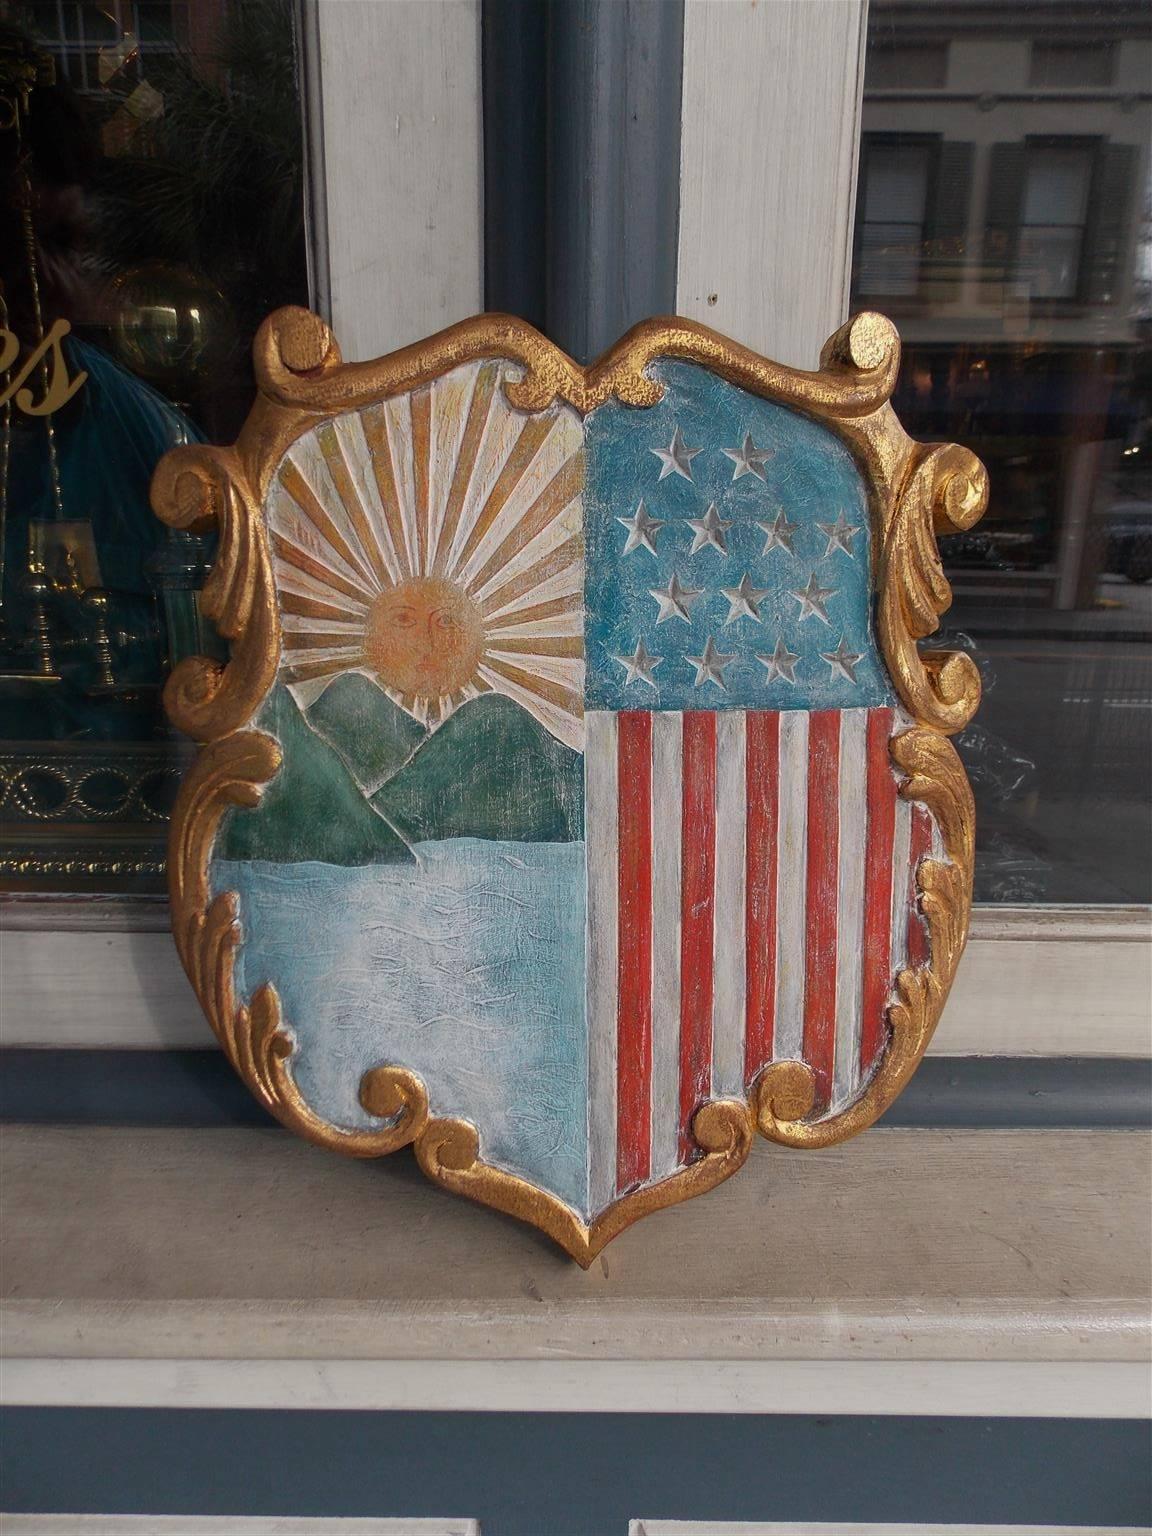 American hand-carved wood gilded and painted patriotic shield depicting the American flag , Sun, Mountains, Ocean with an artistic scrolled acanthus gilt border, Early 20th Century.